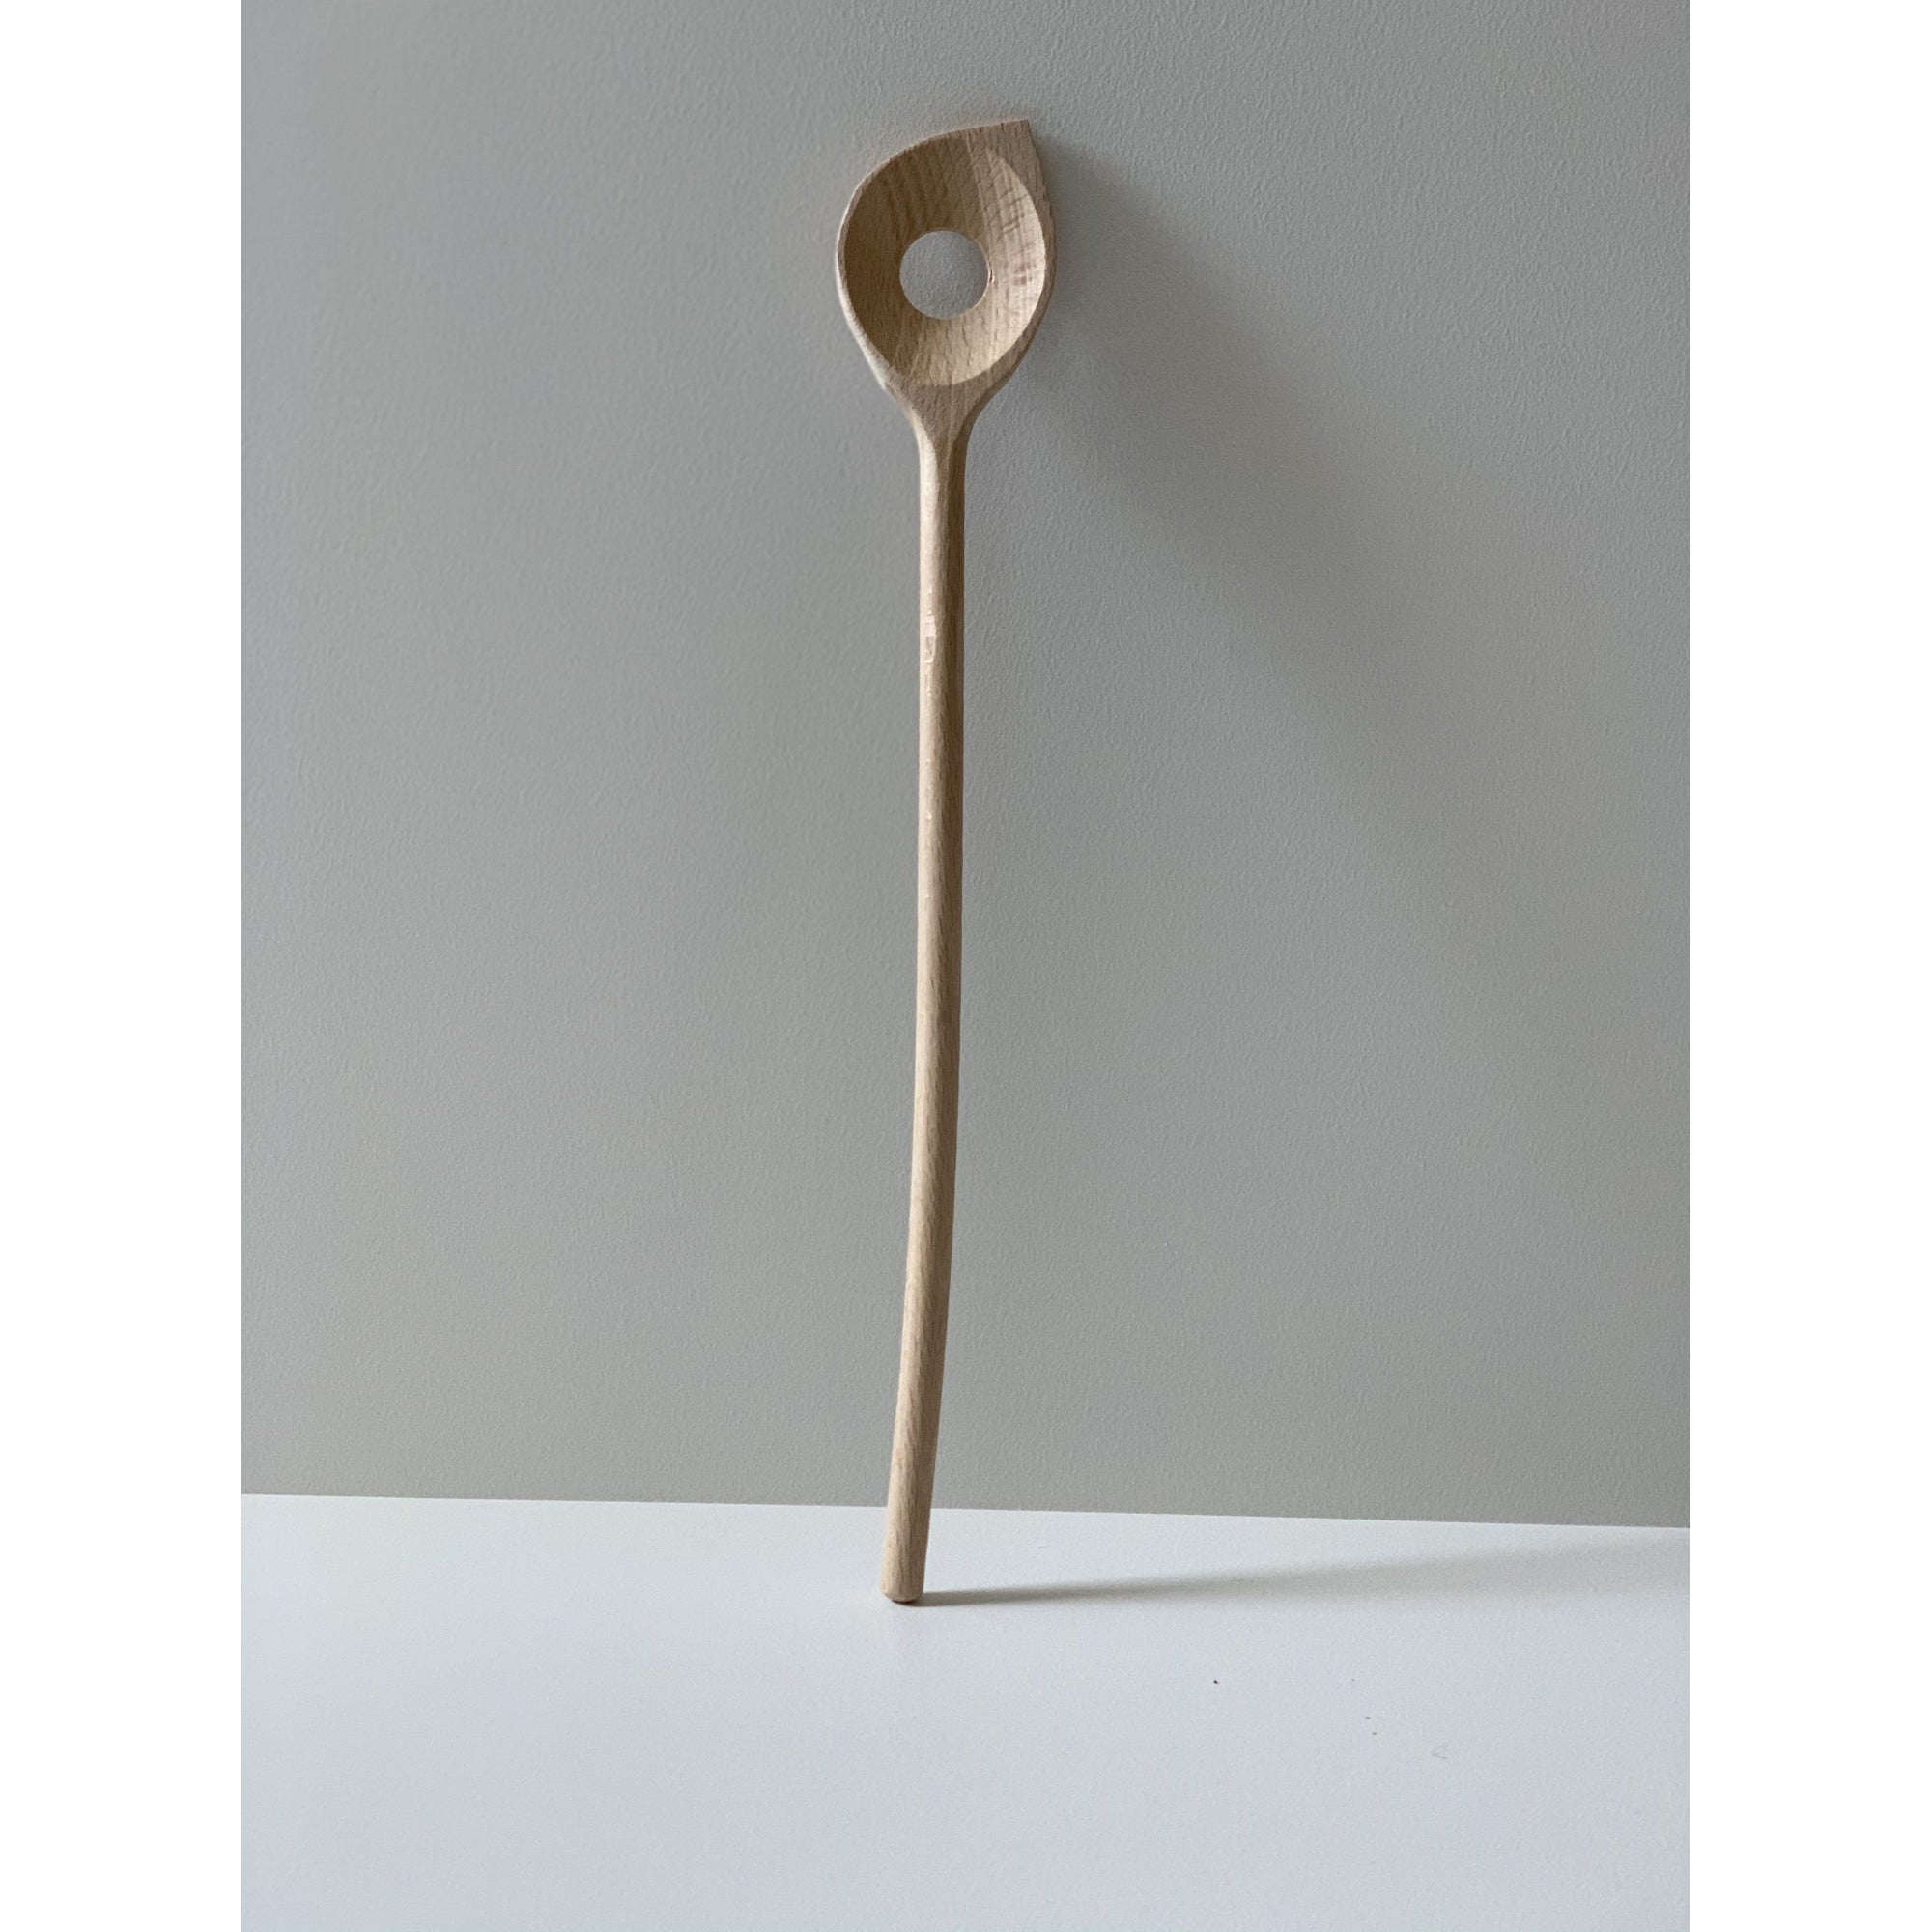 Beech Wood Spoon With Hole - Urban Naturals